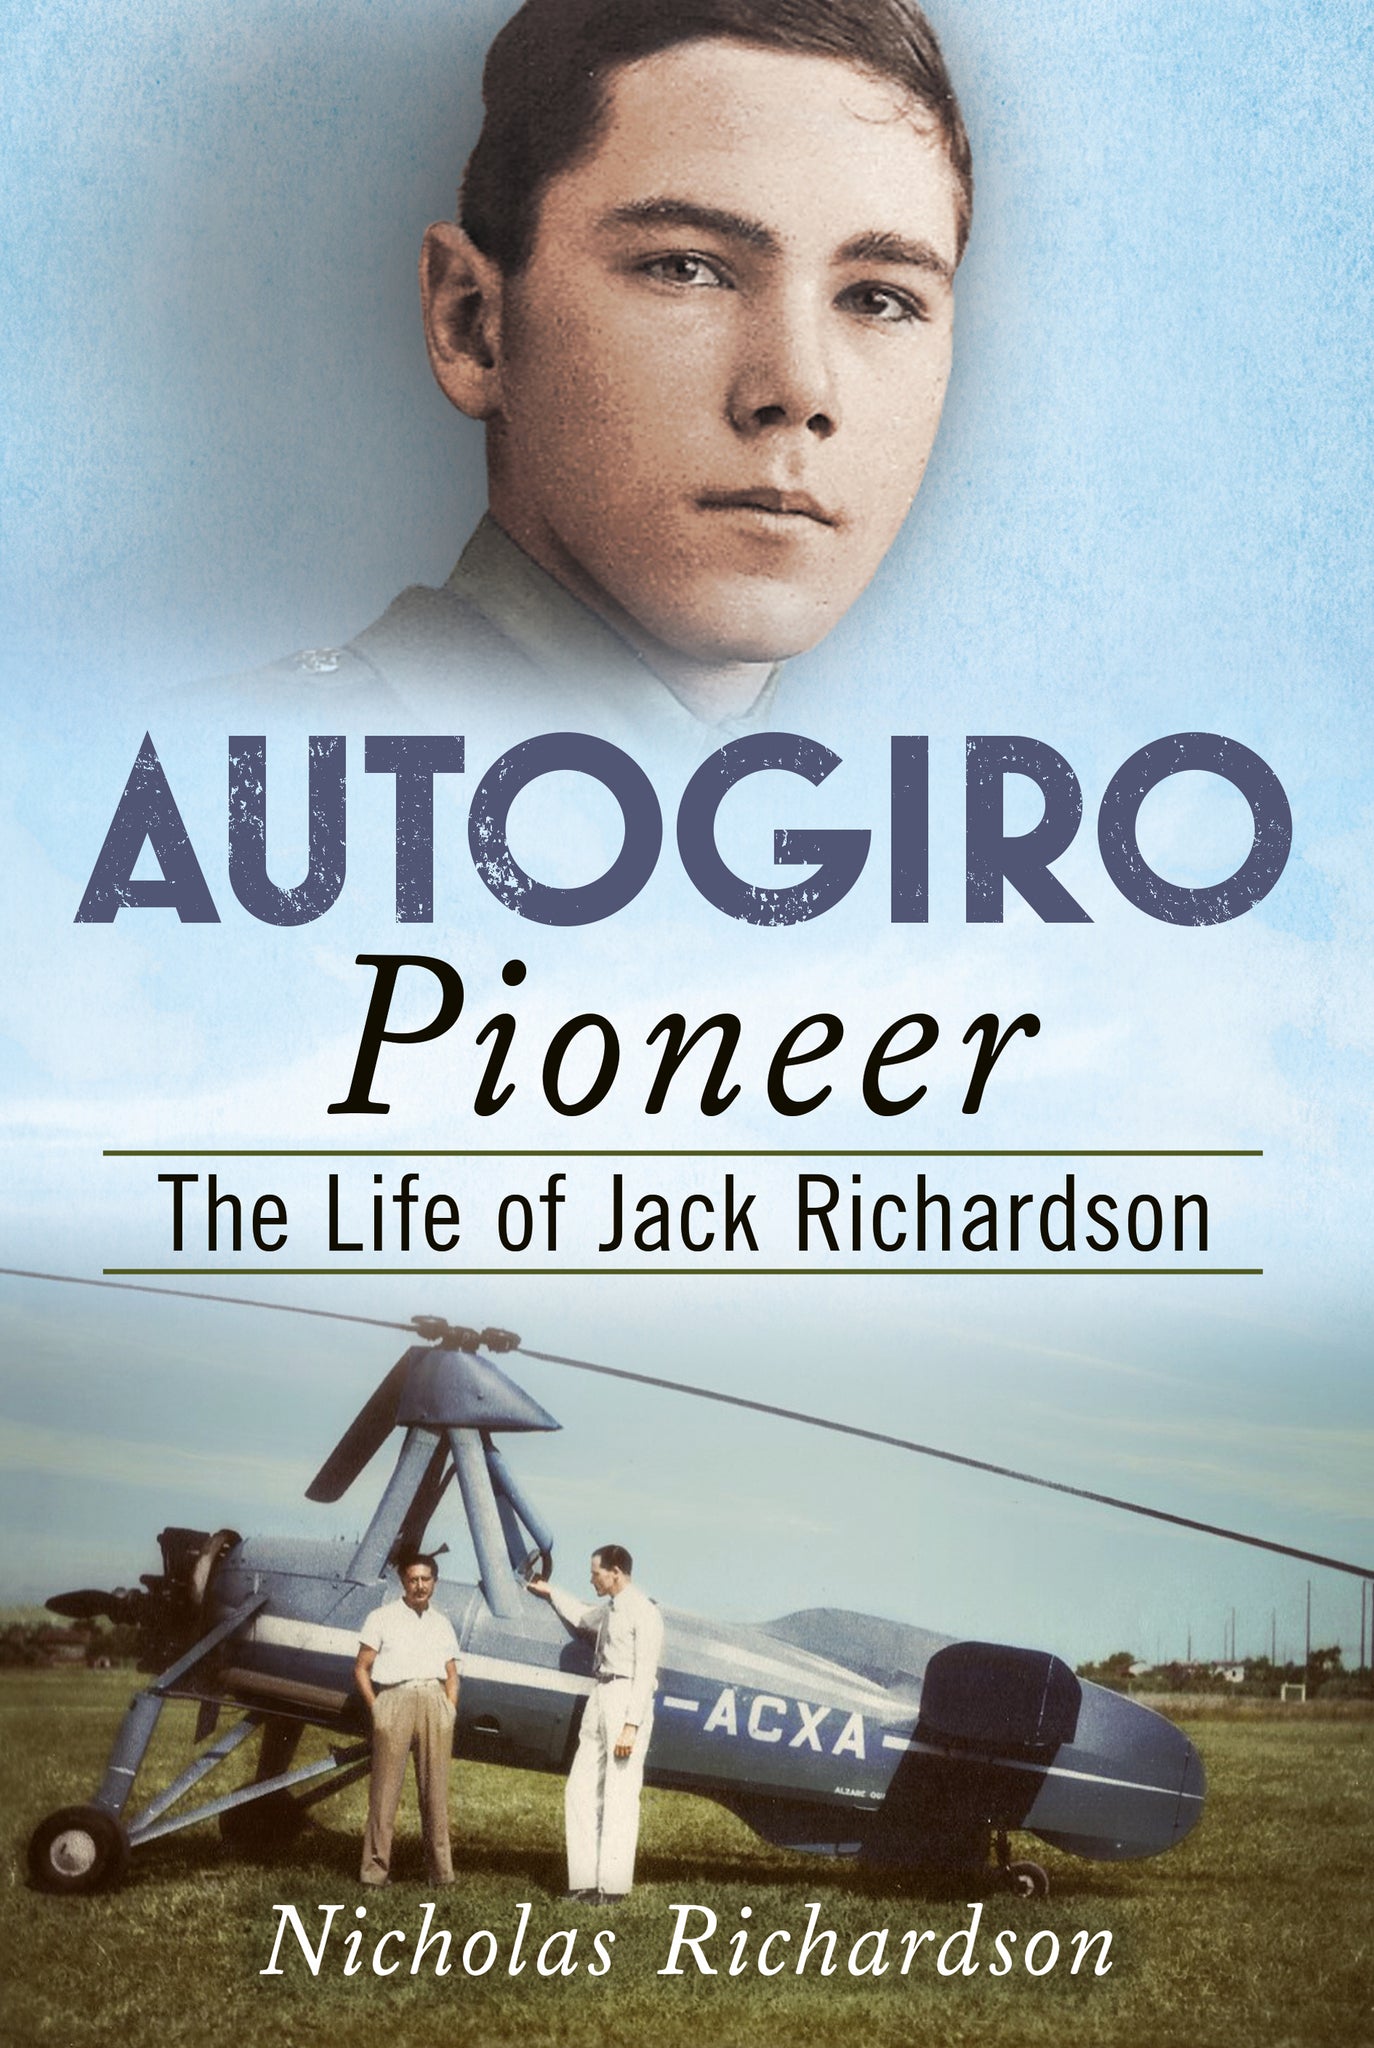 Autogiro Pioneer: The Life of Jack Richardson - available now from Fonthill Media